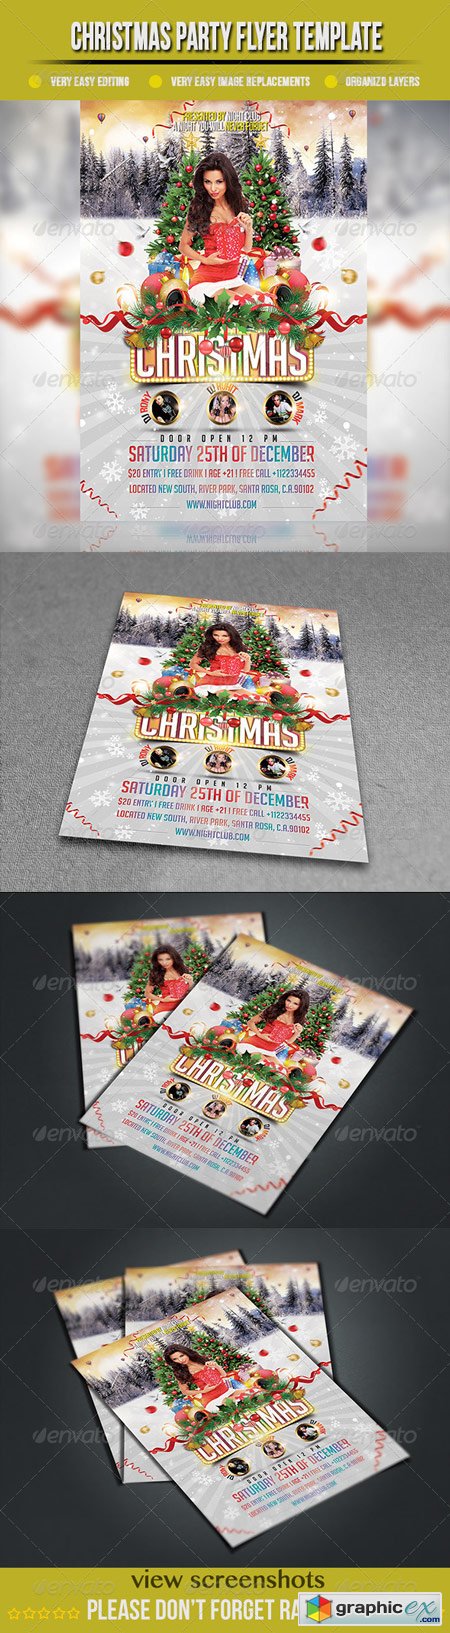 Christmas Party Flyer Template 3477501